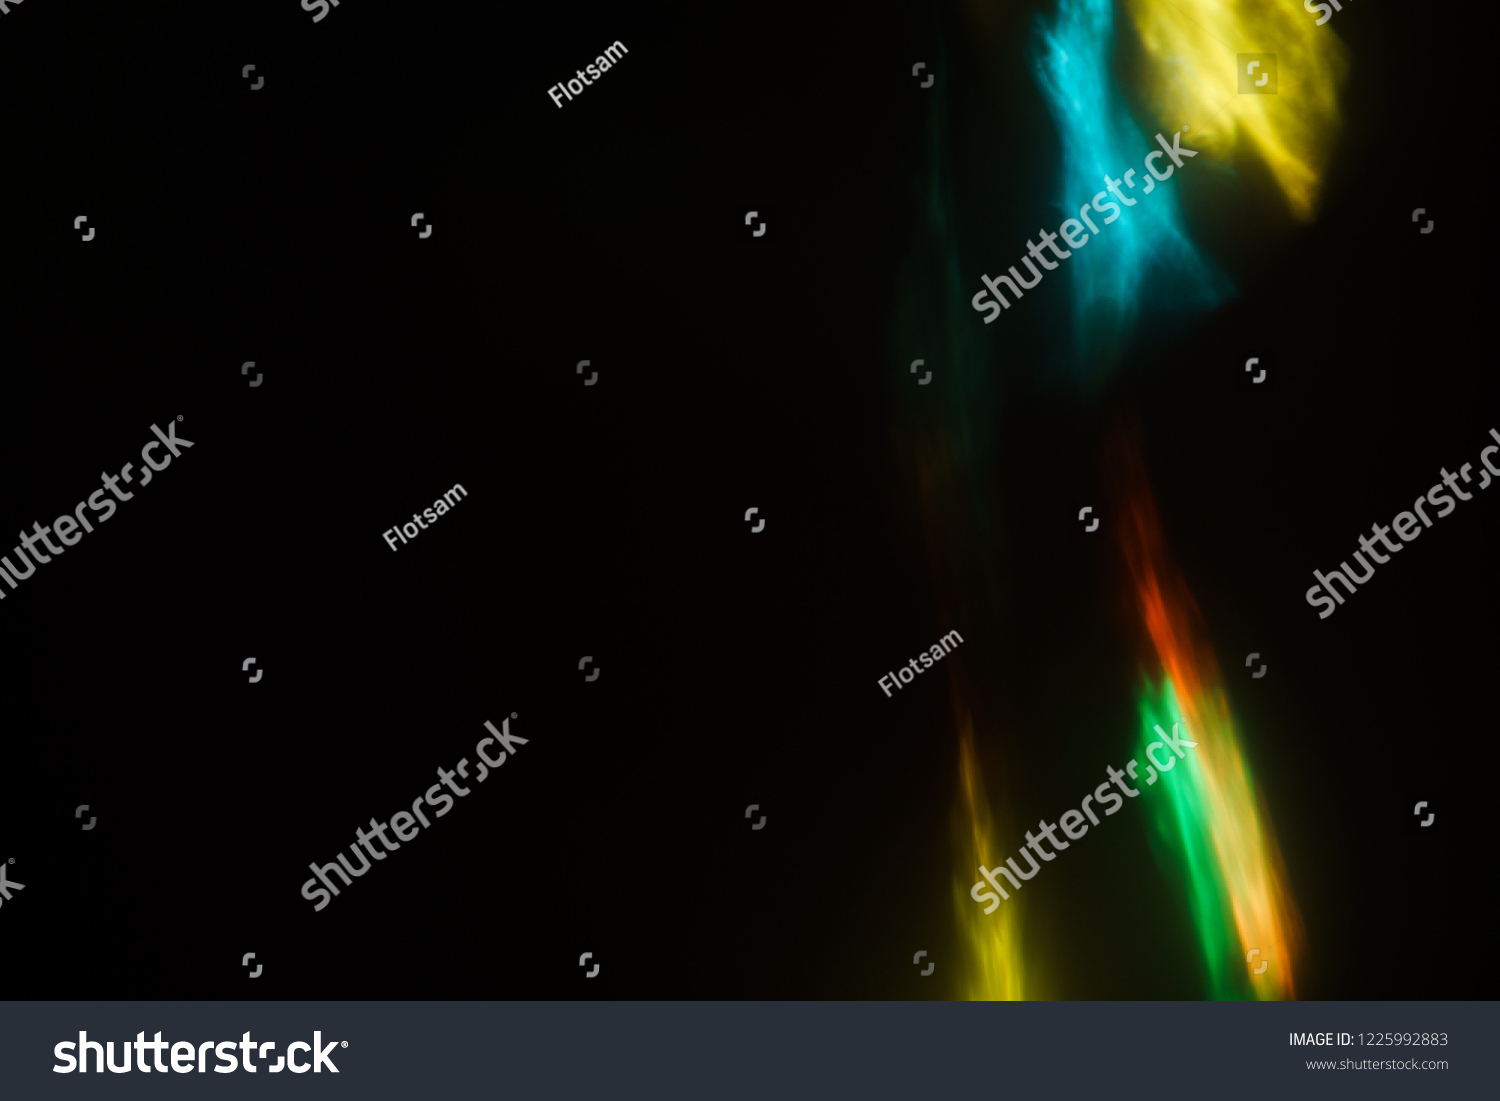 blurred defocused color light flashes and rays. lens flare effect. creative abstract background. festive disco nightlife atmosphere #1225992883